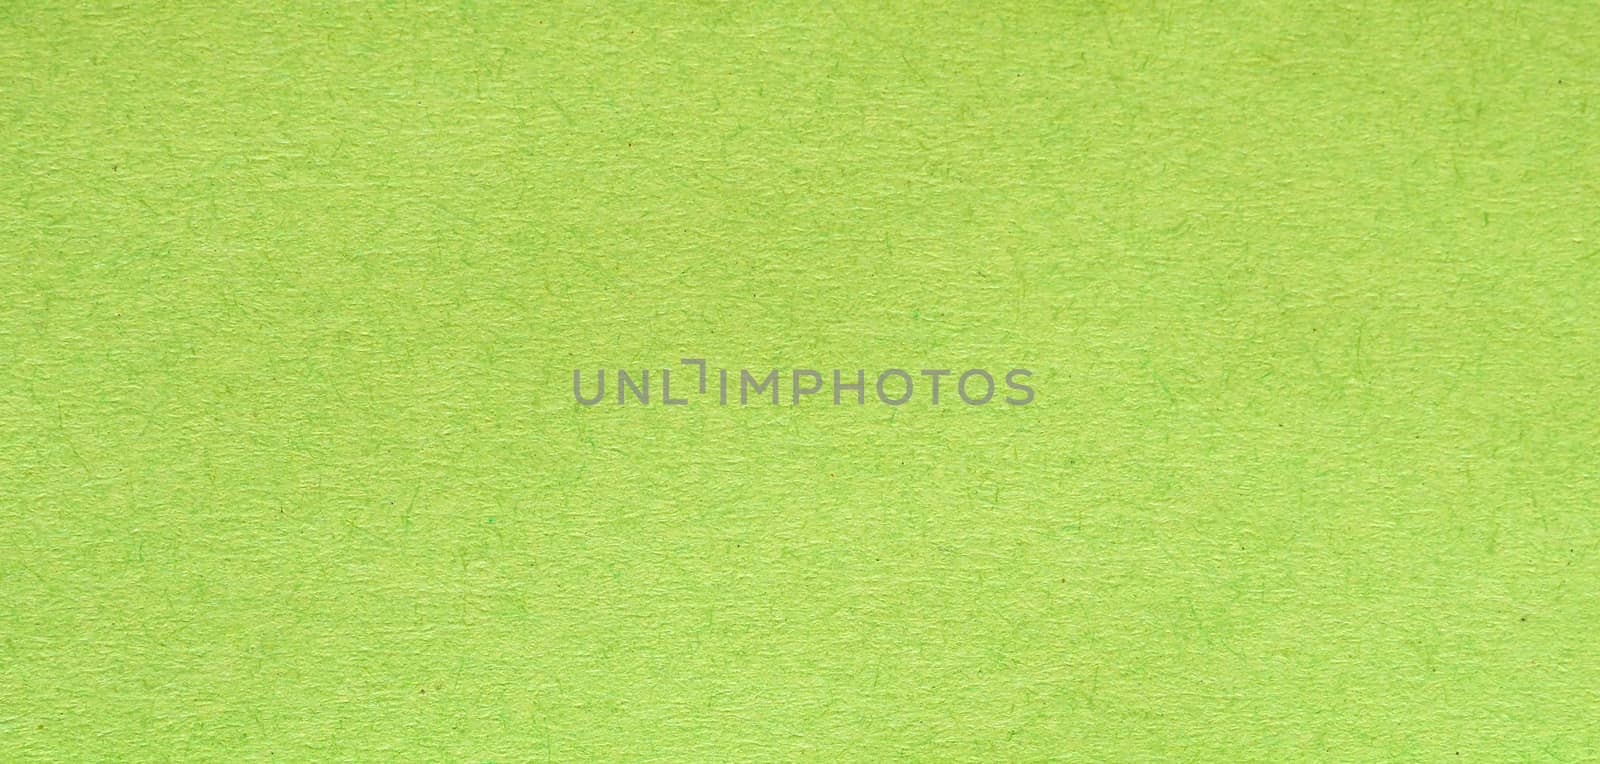 green paper texture useful as a background